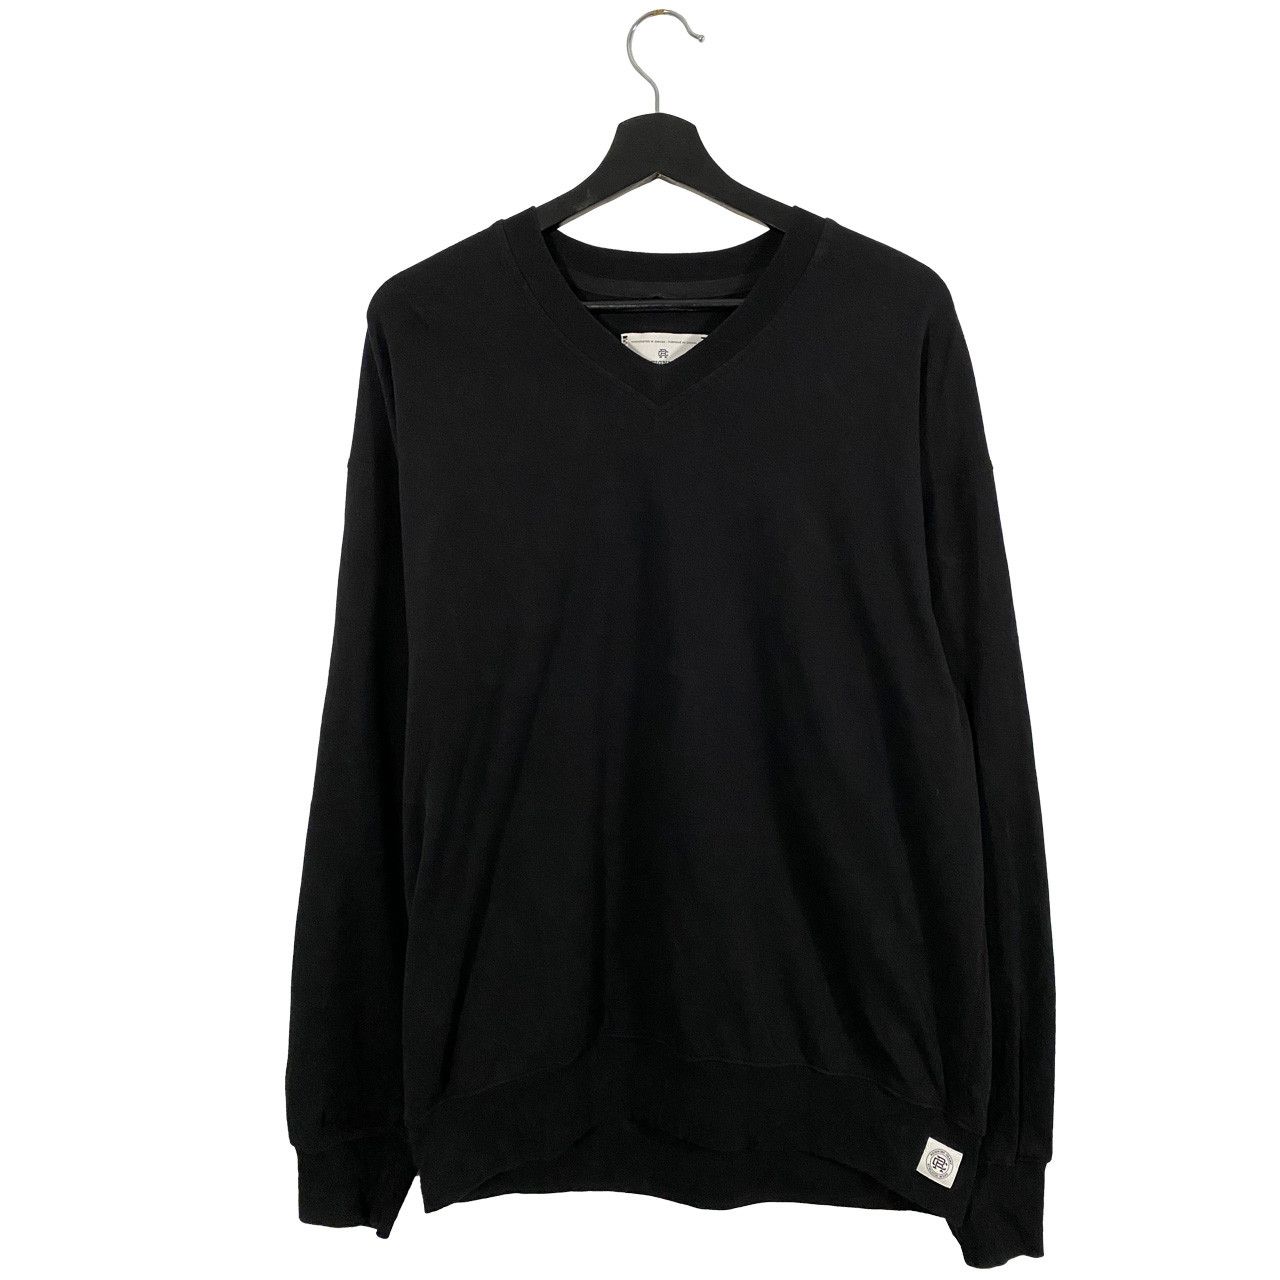 Reigning Champ Reigning Champ V-Neck Midweight Terry crew sweatshirt ...